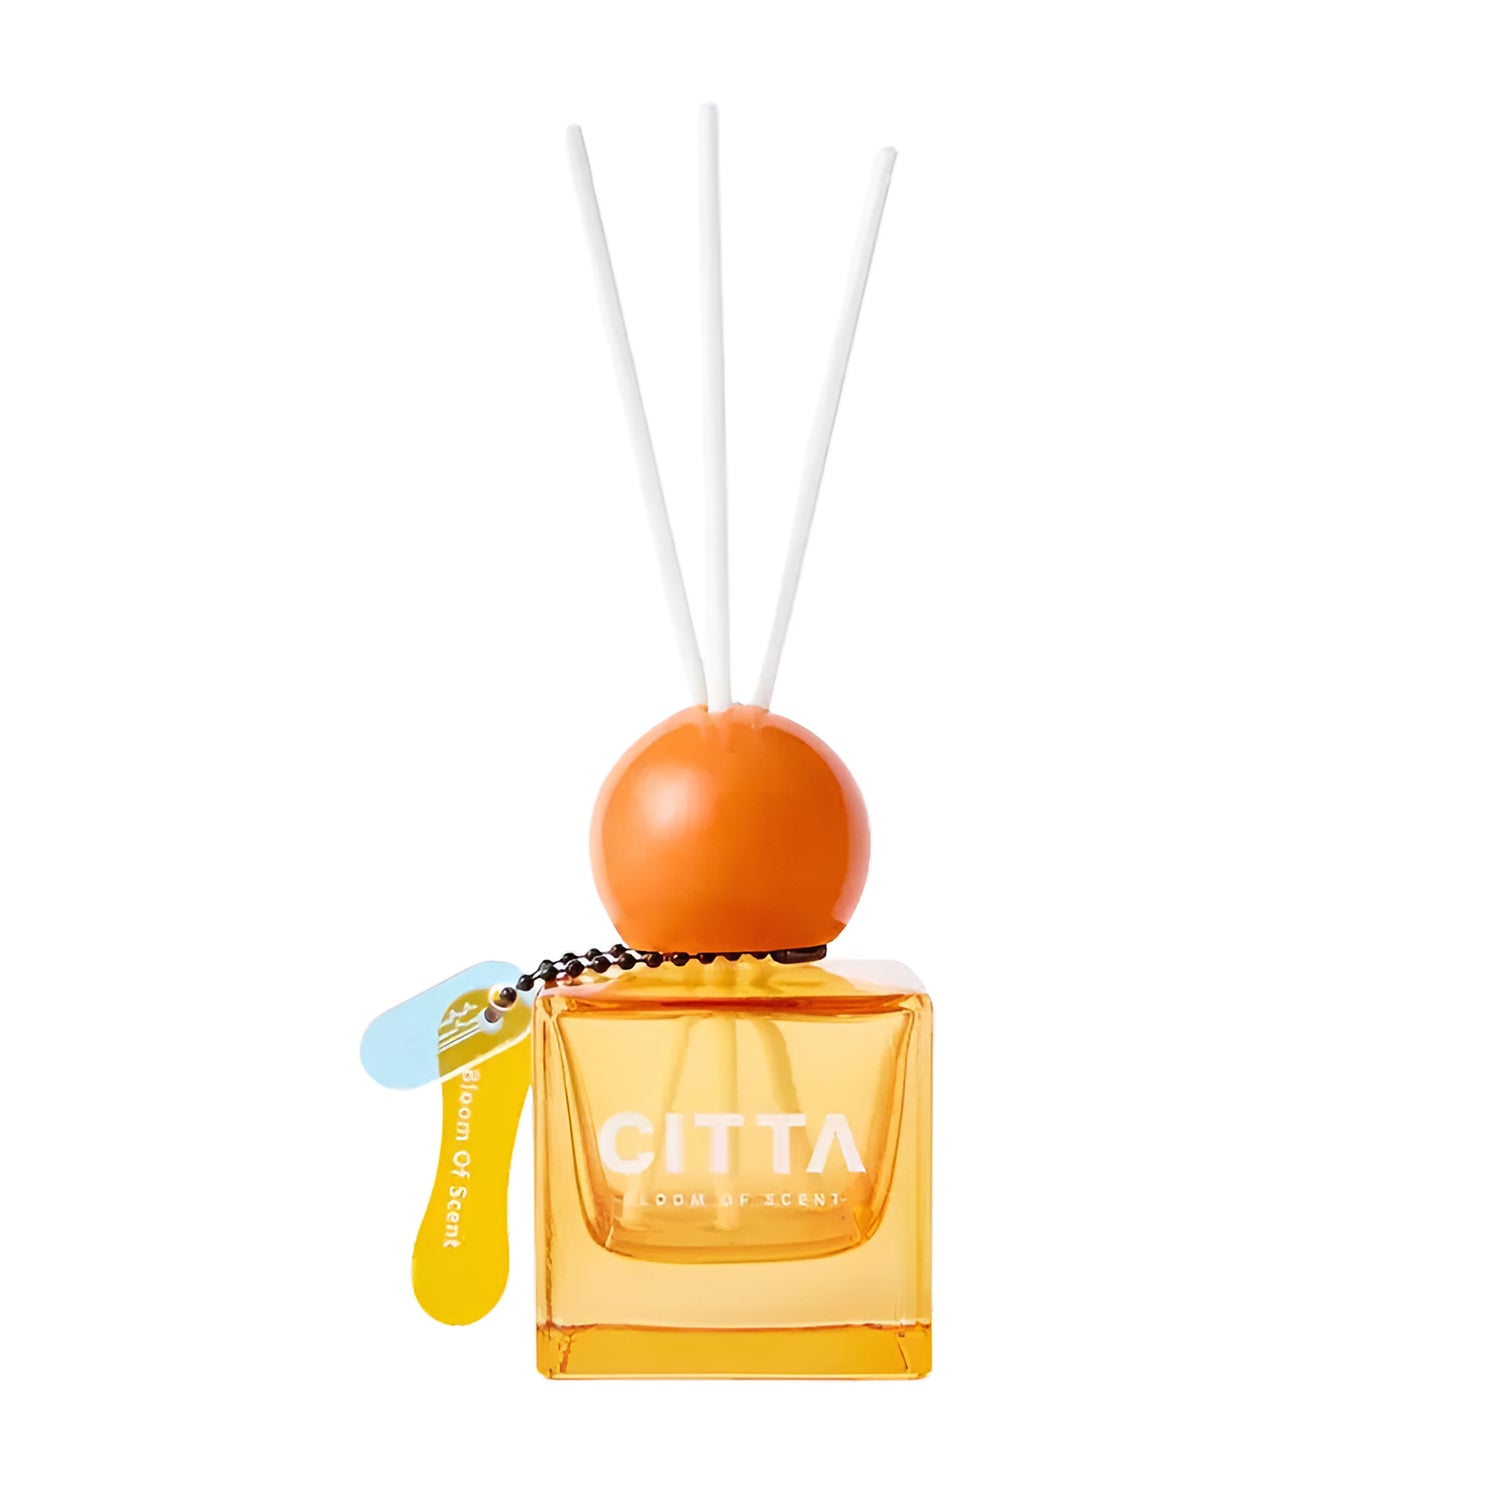 CITTA 50ML Reed Diffuser Set with Reed Sticks - Aromatherapy Essential Oil Home Fragrance Room Scented Reed Diffuser Refill